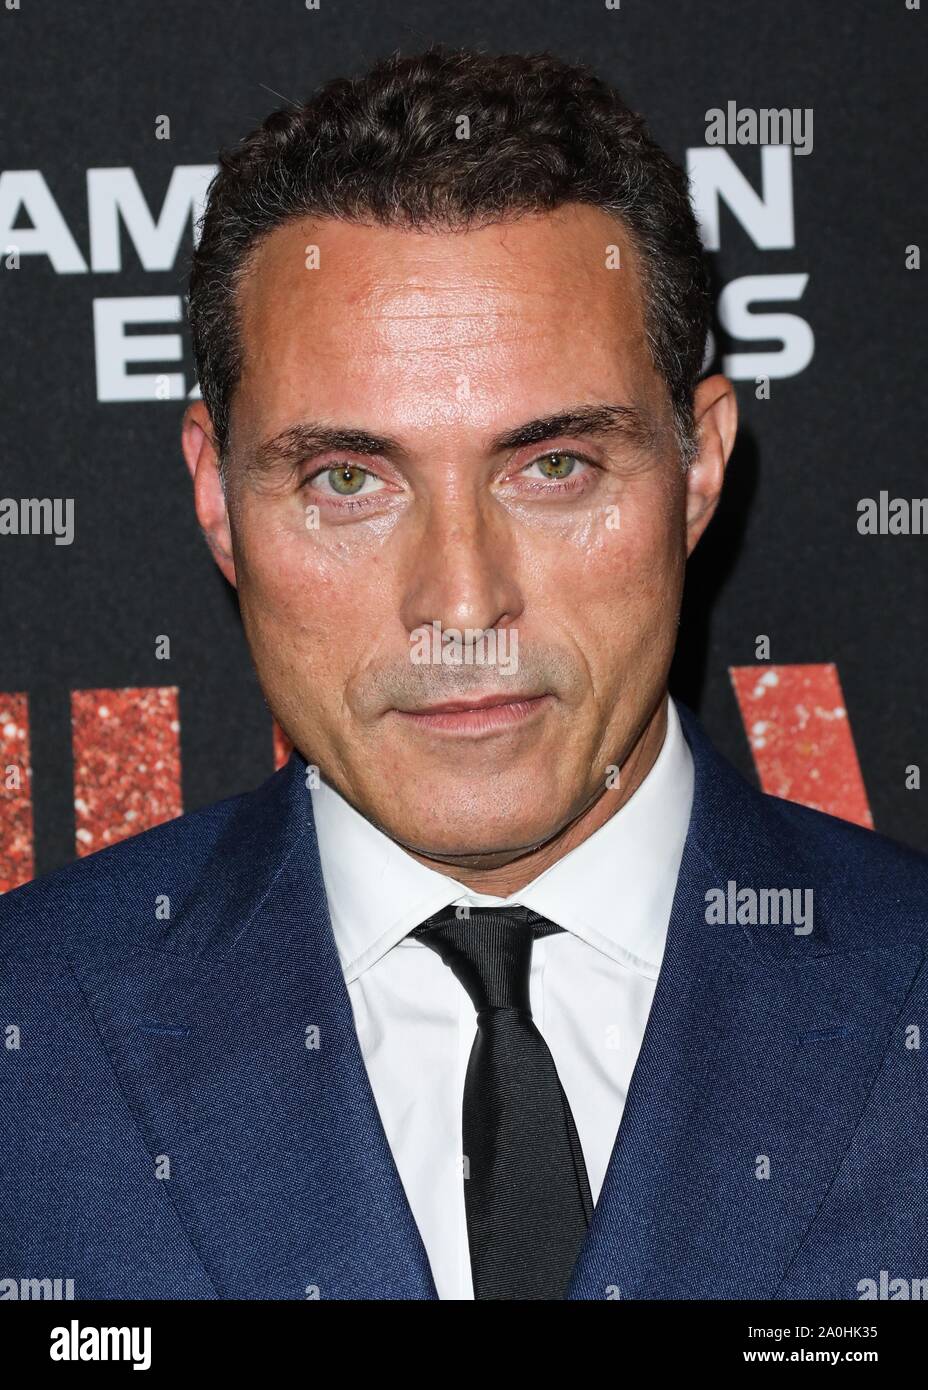 Beverly Hills, United States. 19th Sep, 2019. BEVERLY HILLS, LOS ANGELES, CALIFORNIA, USA - SEPTEMBER 19: Rufus Sewell arrives at the Premiere Of Roadside Attraction's 'Judy' held at the Samuel Goldwyn Theater at the Academy of Motion Picture Arts and Sciences on September 19, 2019 in Beverly Hills, Los Angeles, California, United States. (Photo by David Acosta/Image Press Agency) Credit: Image Press Agency/Alamy Live News Stock Photo